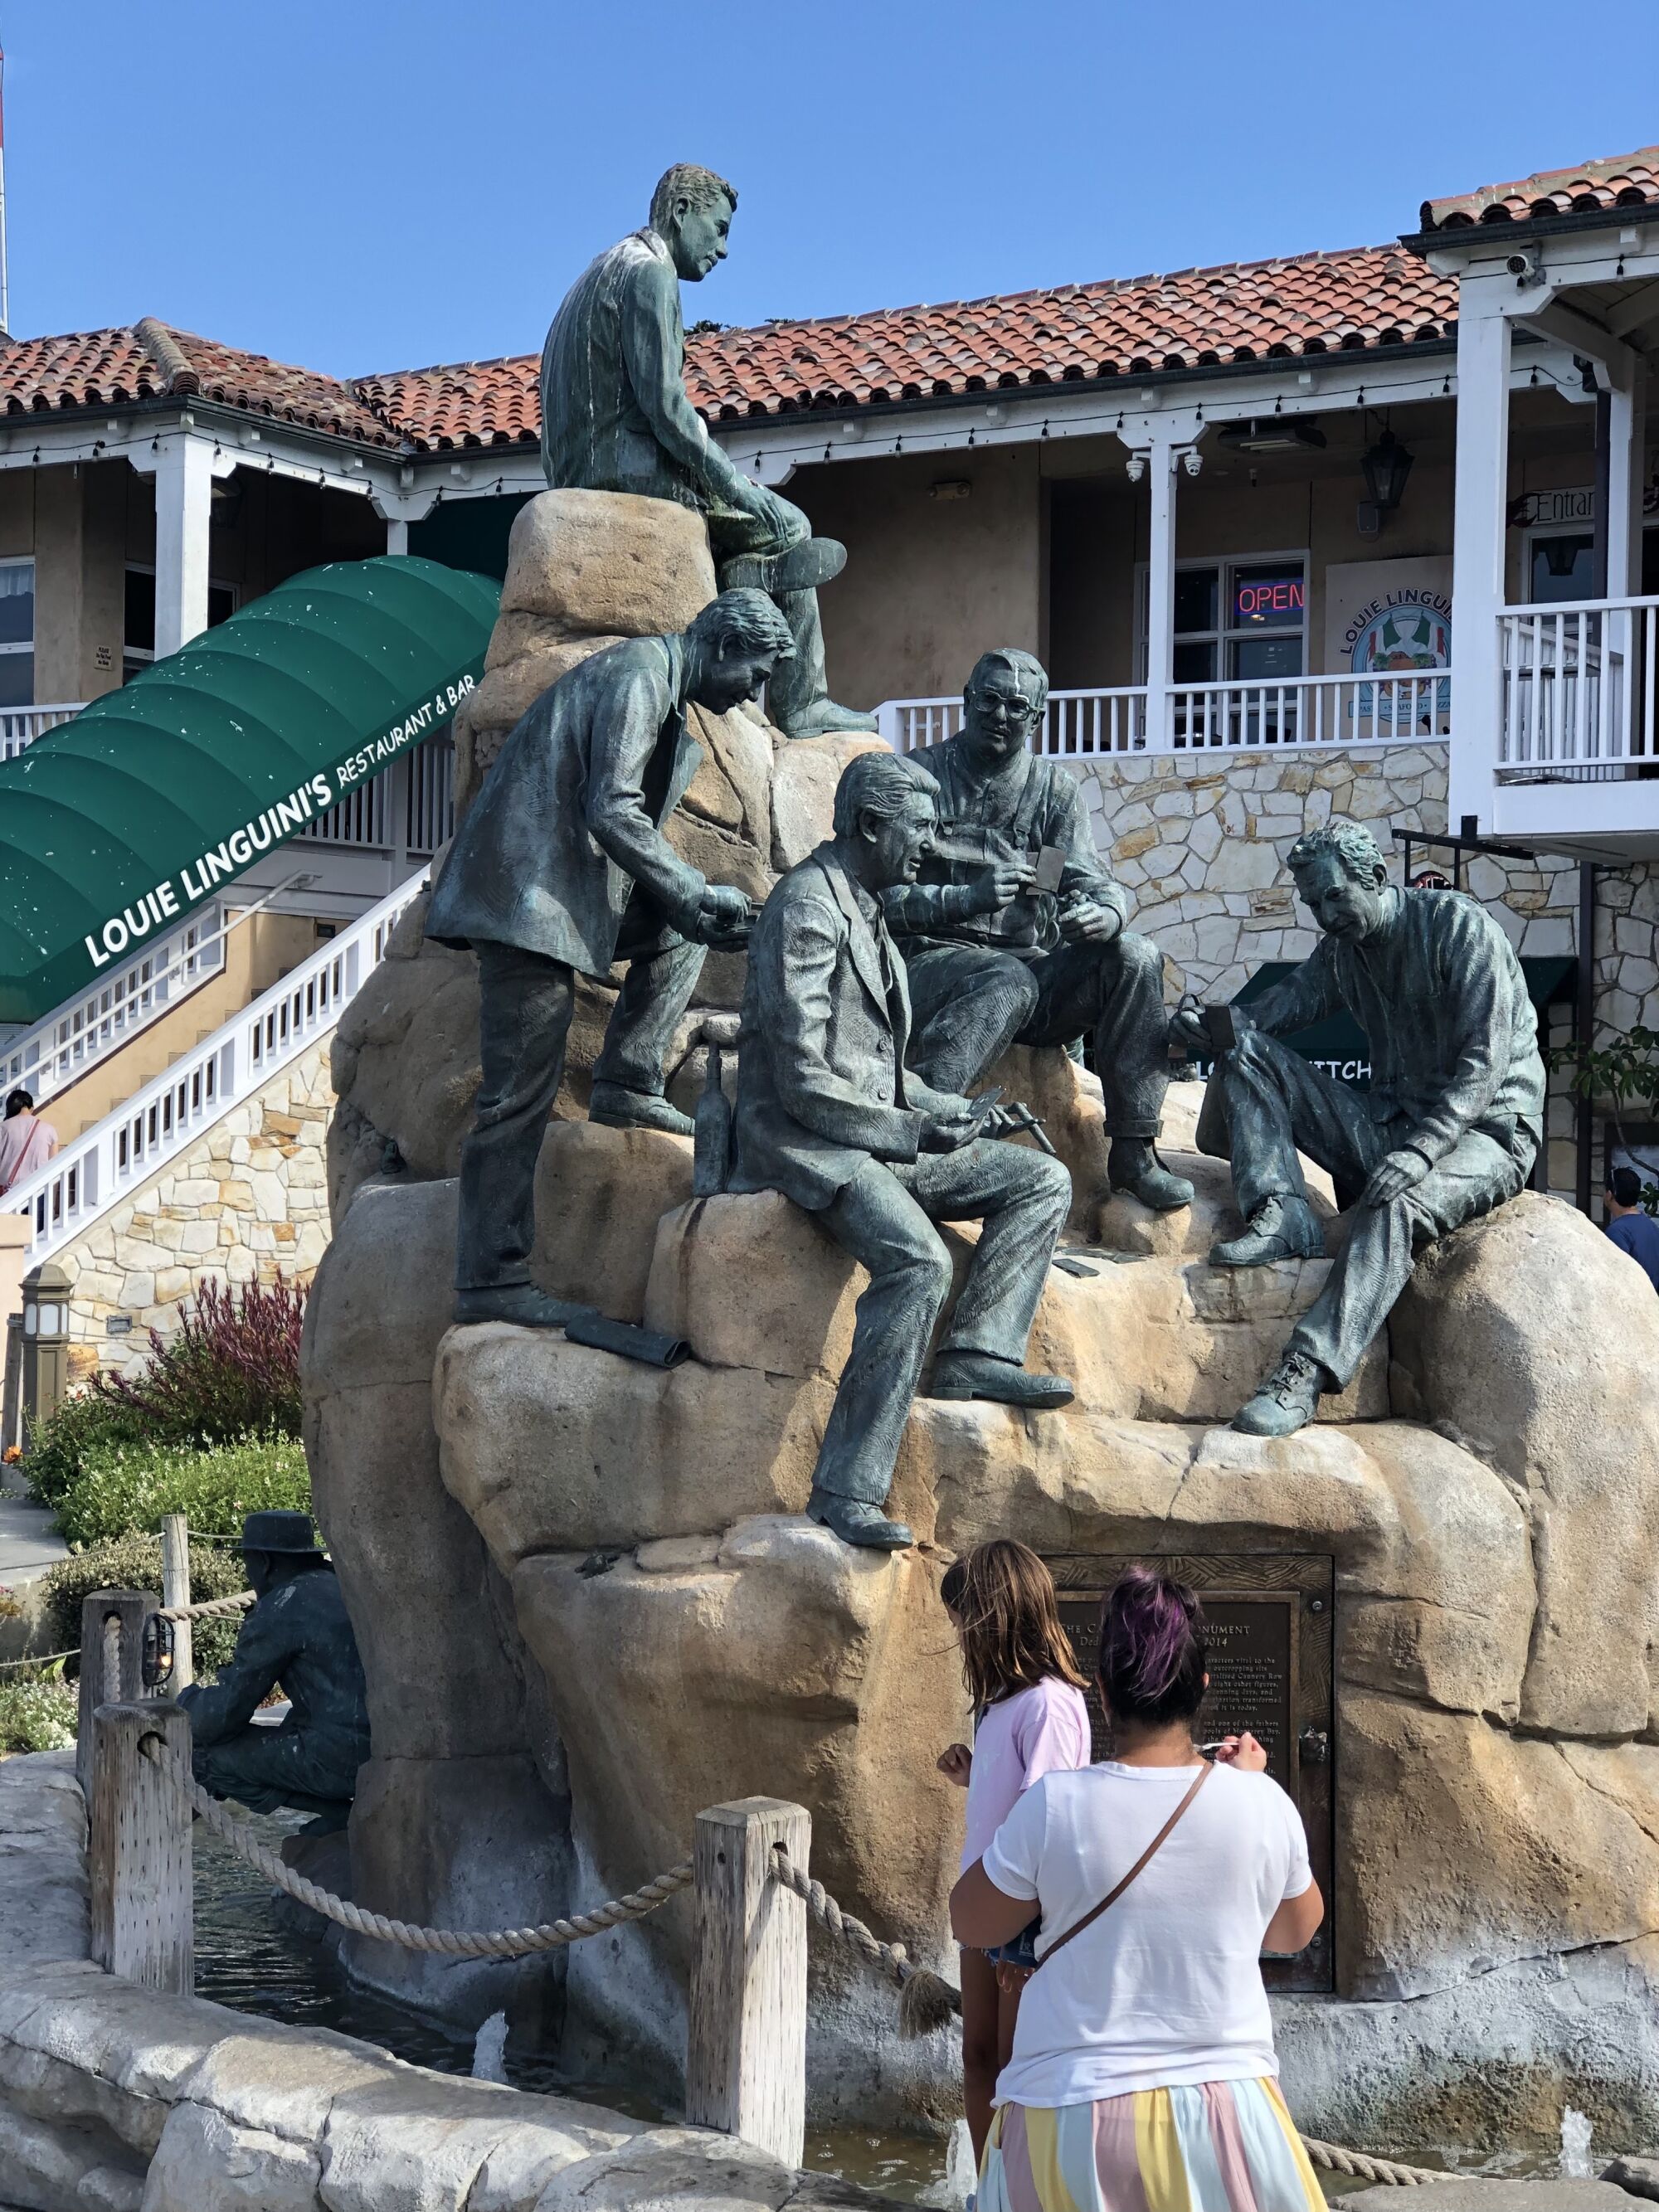 People passing a sculpture of several life-size figures on a large mound of tan boulders outside a restaurant.